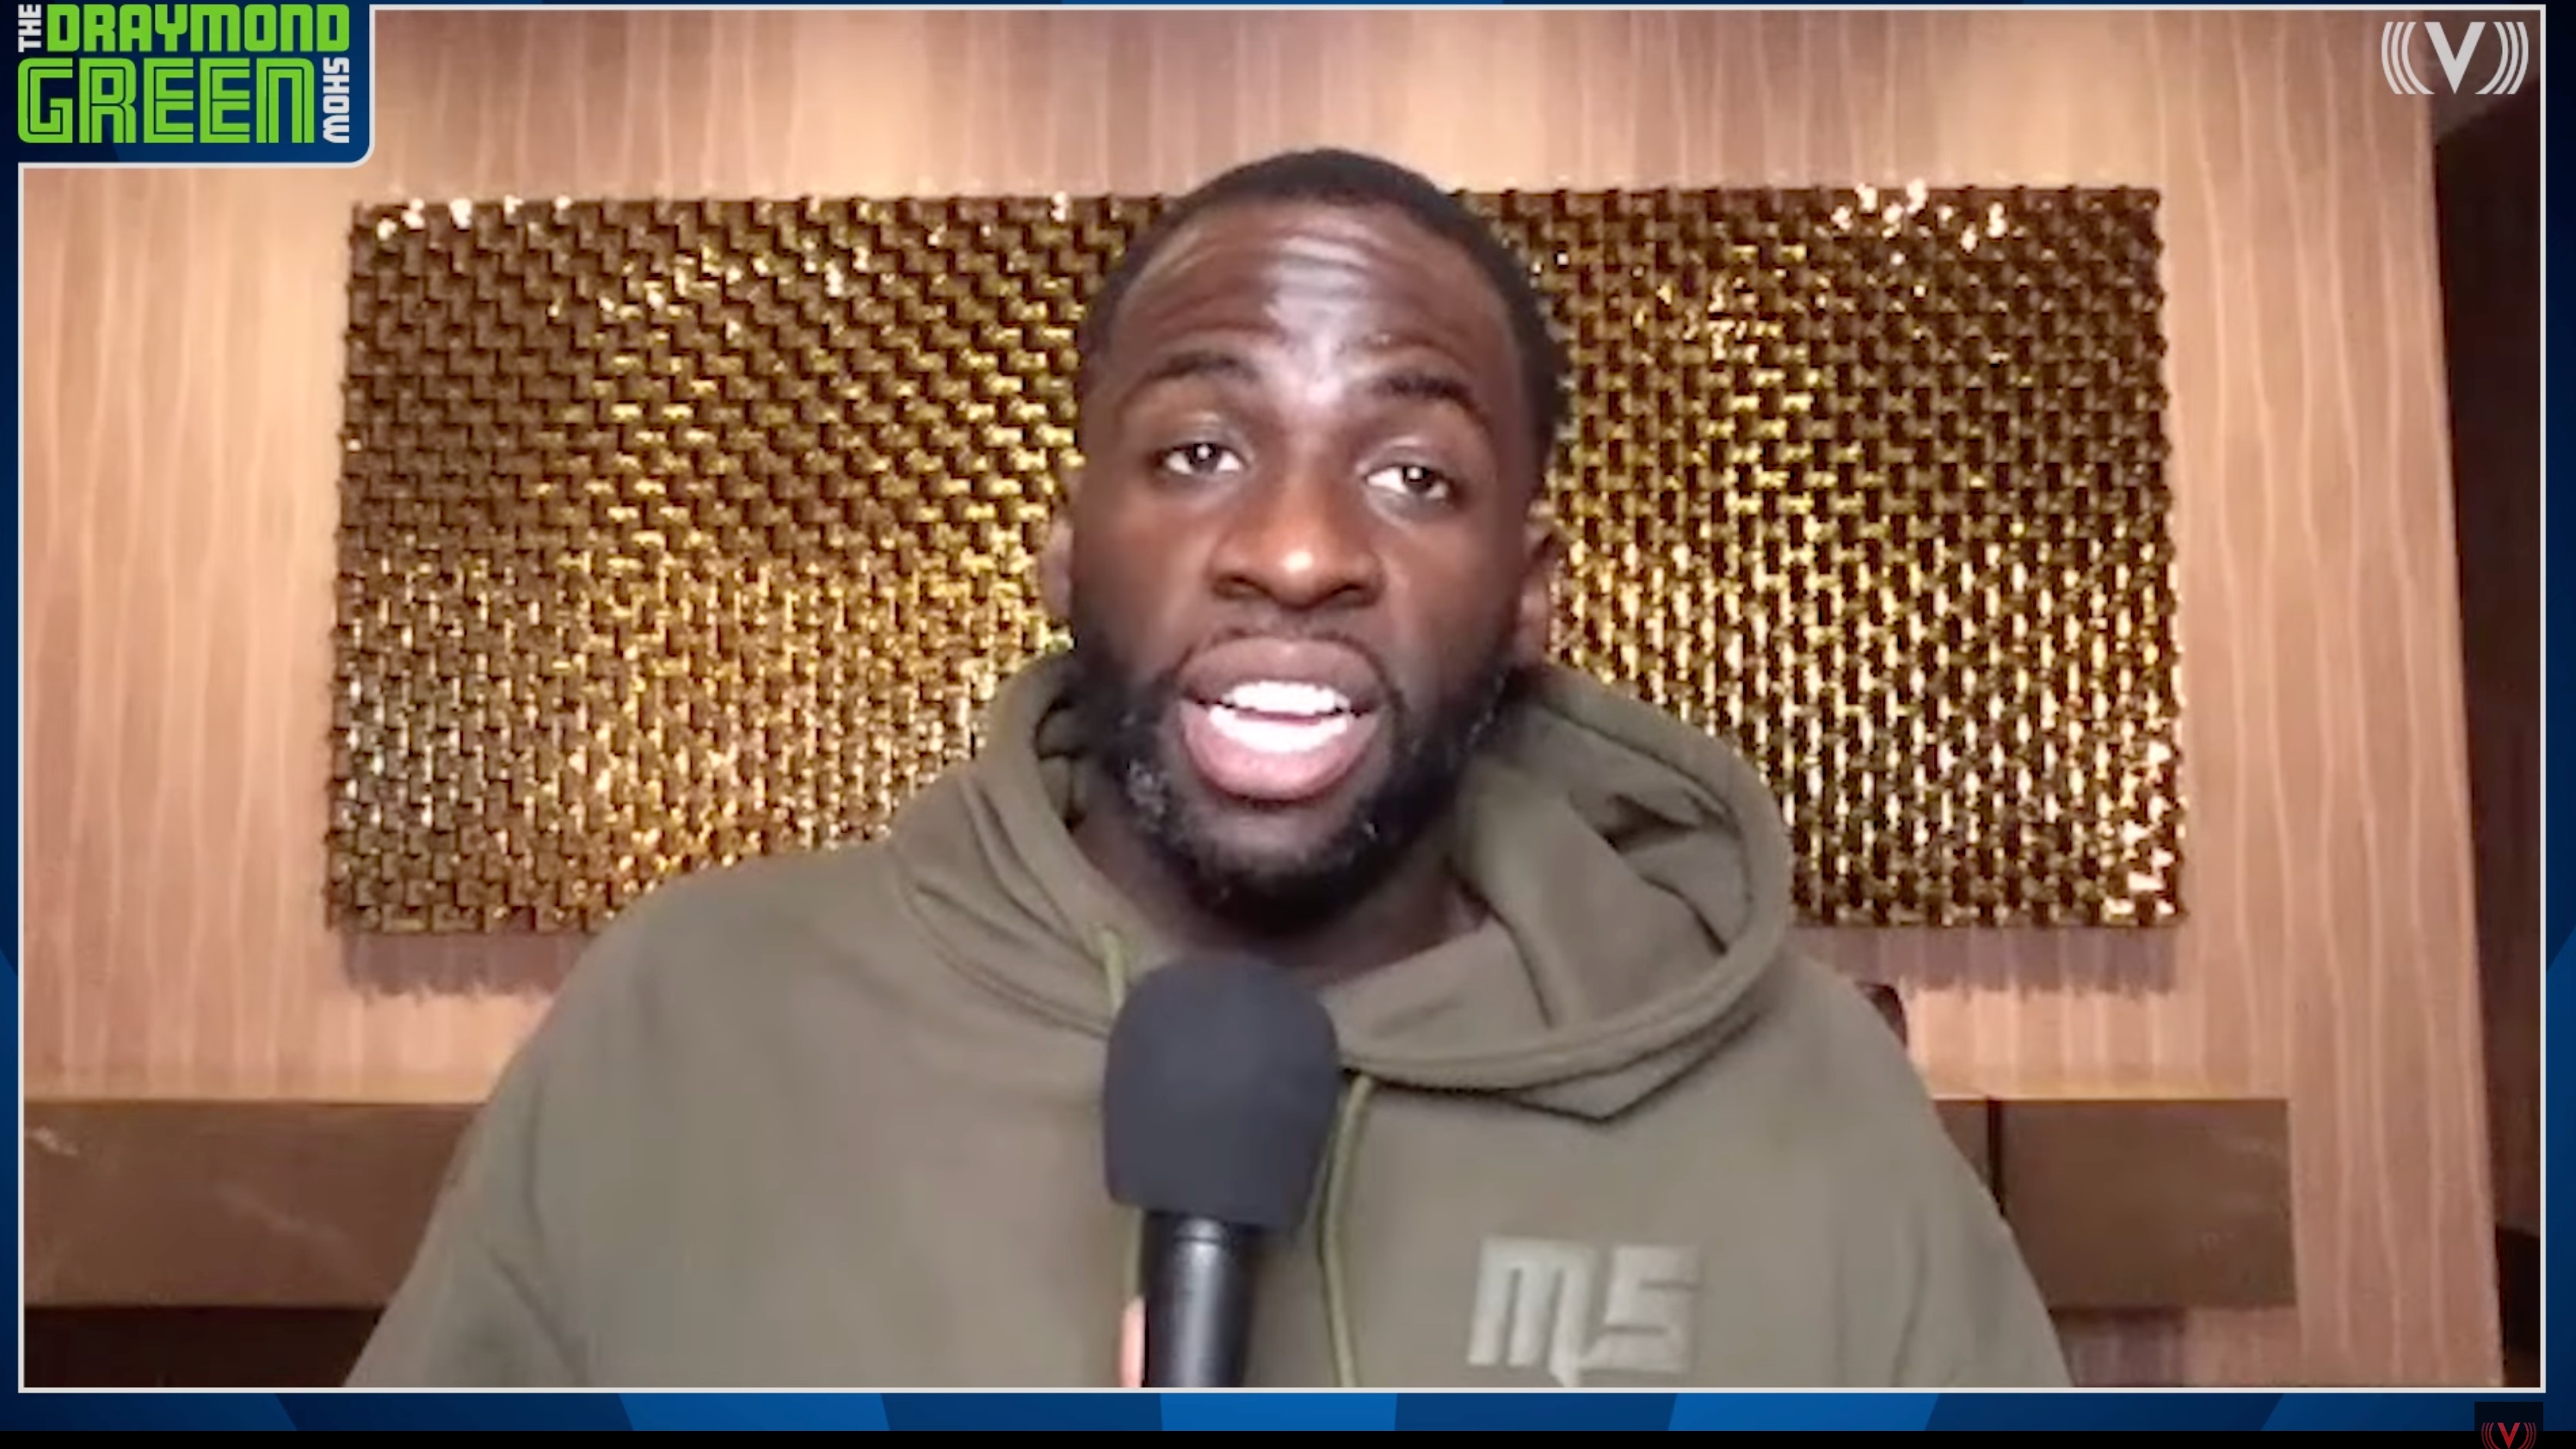 Draymond Green discusses Kyrie Irving trade